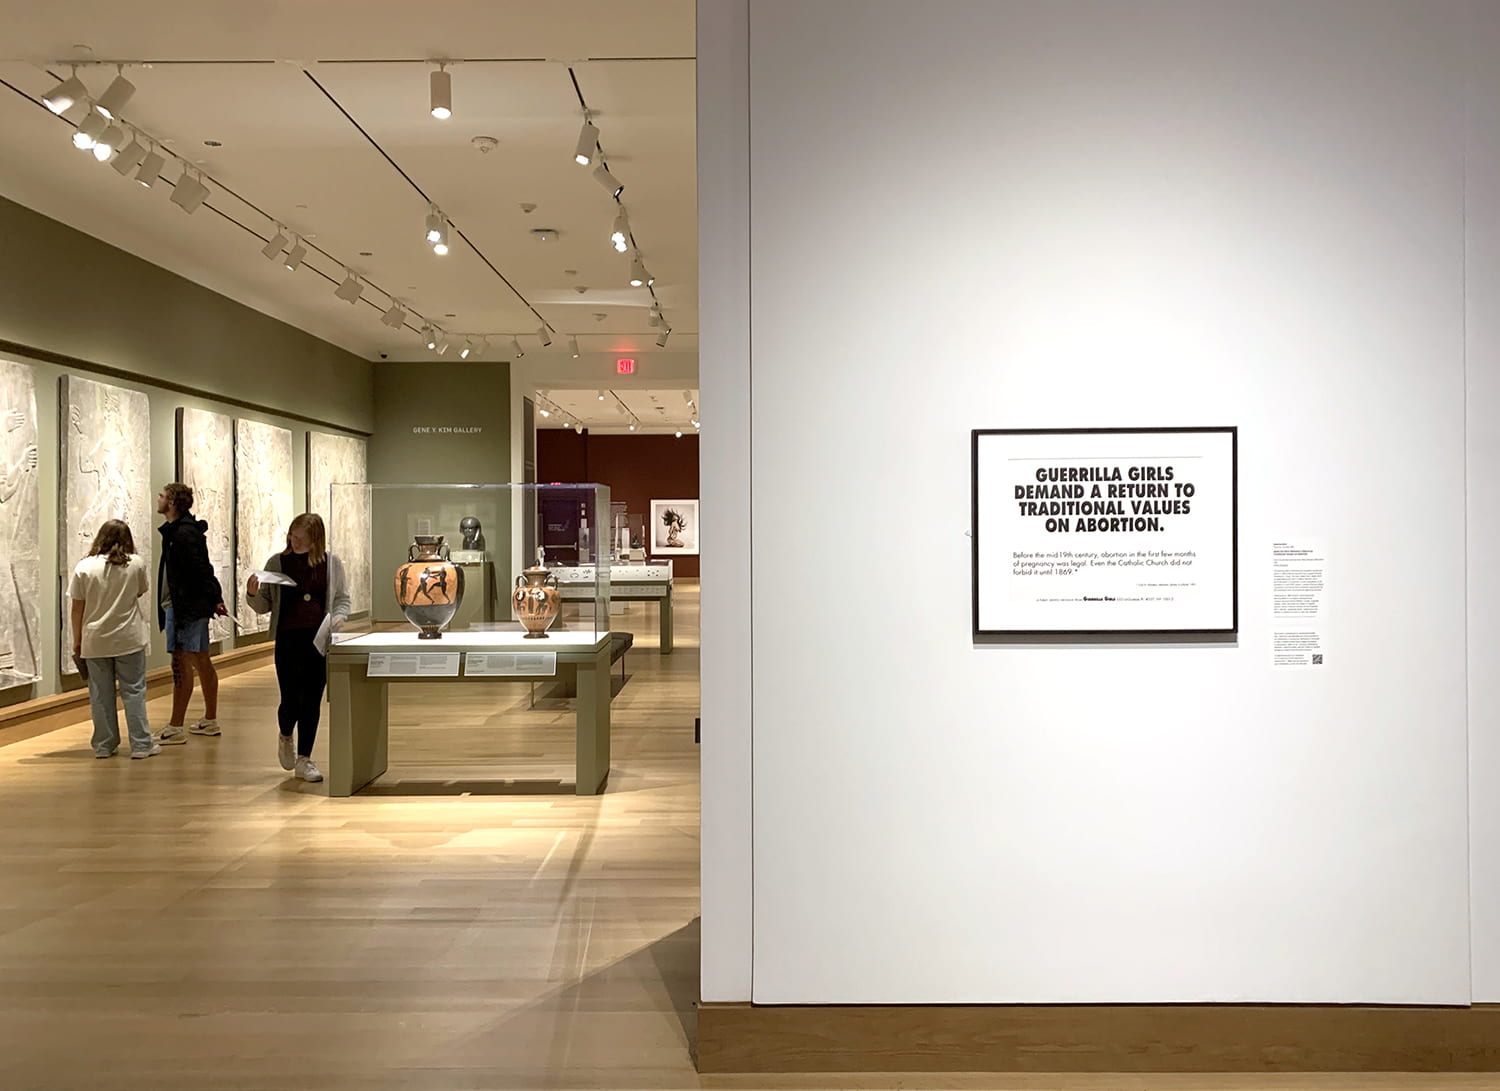 A museum gallery with a Guerrilla Girls poster in the foreground, and students explore the galleries beyond.